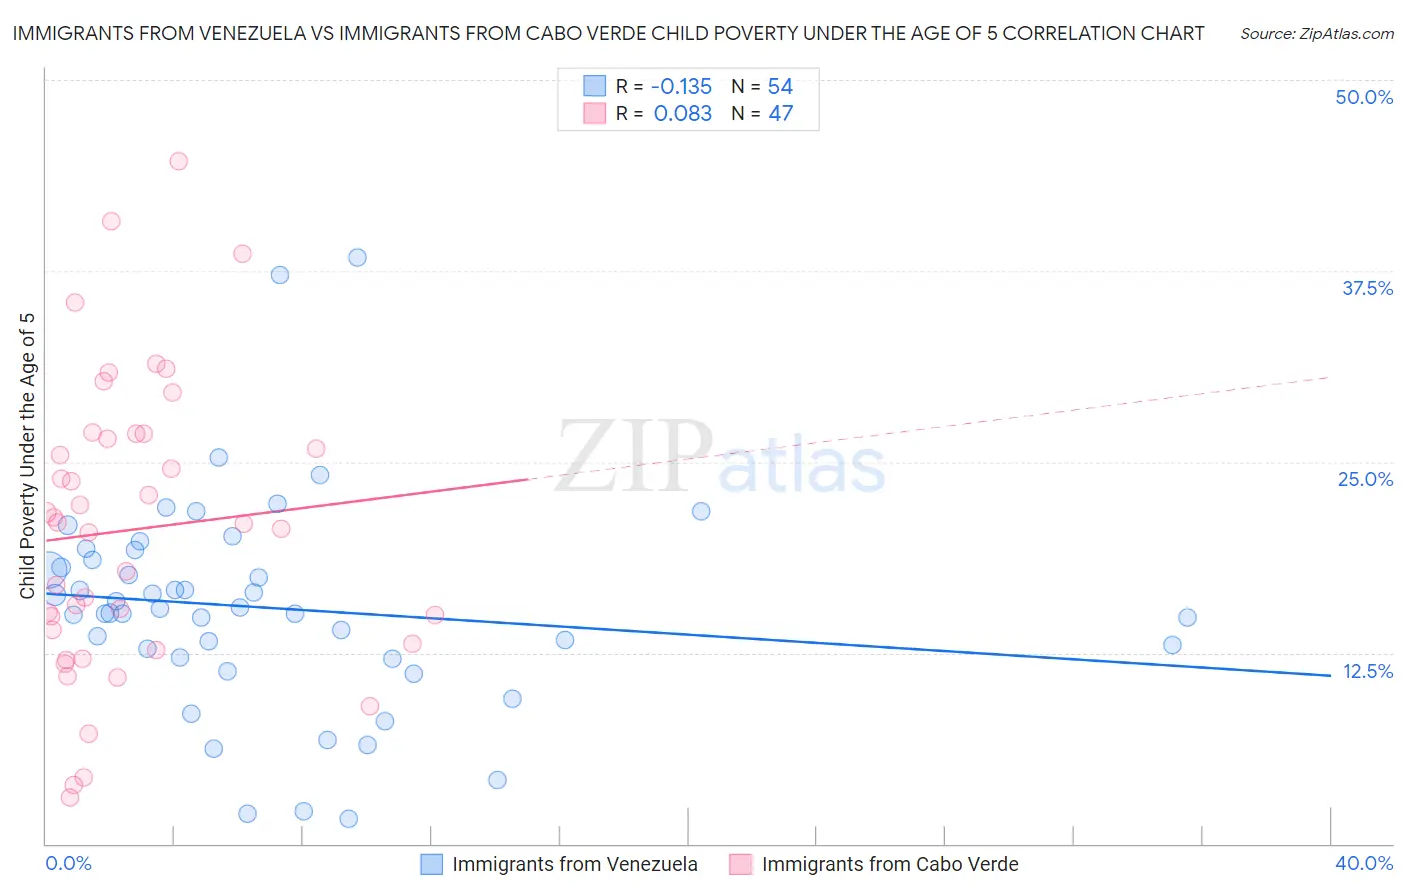 Immigrants from Venezuela vs Immigrants from Cabo Verde Child Poverty Under the Age of 5